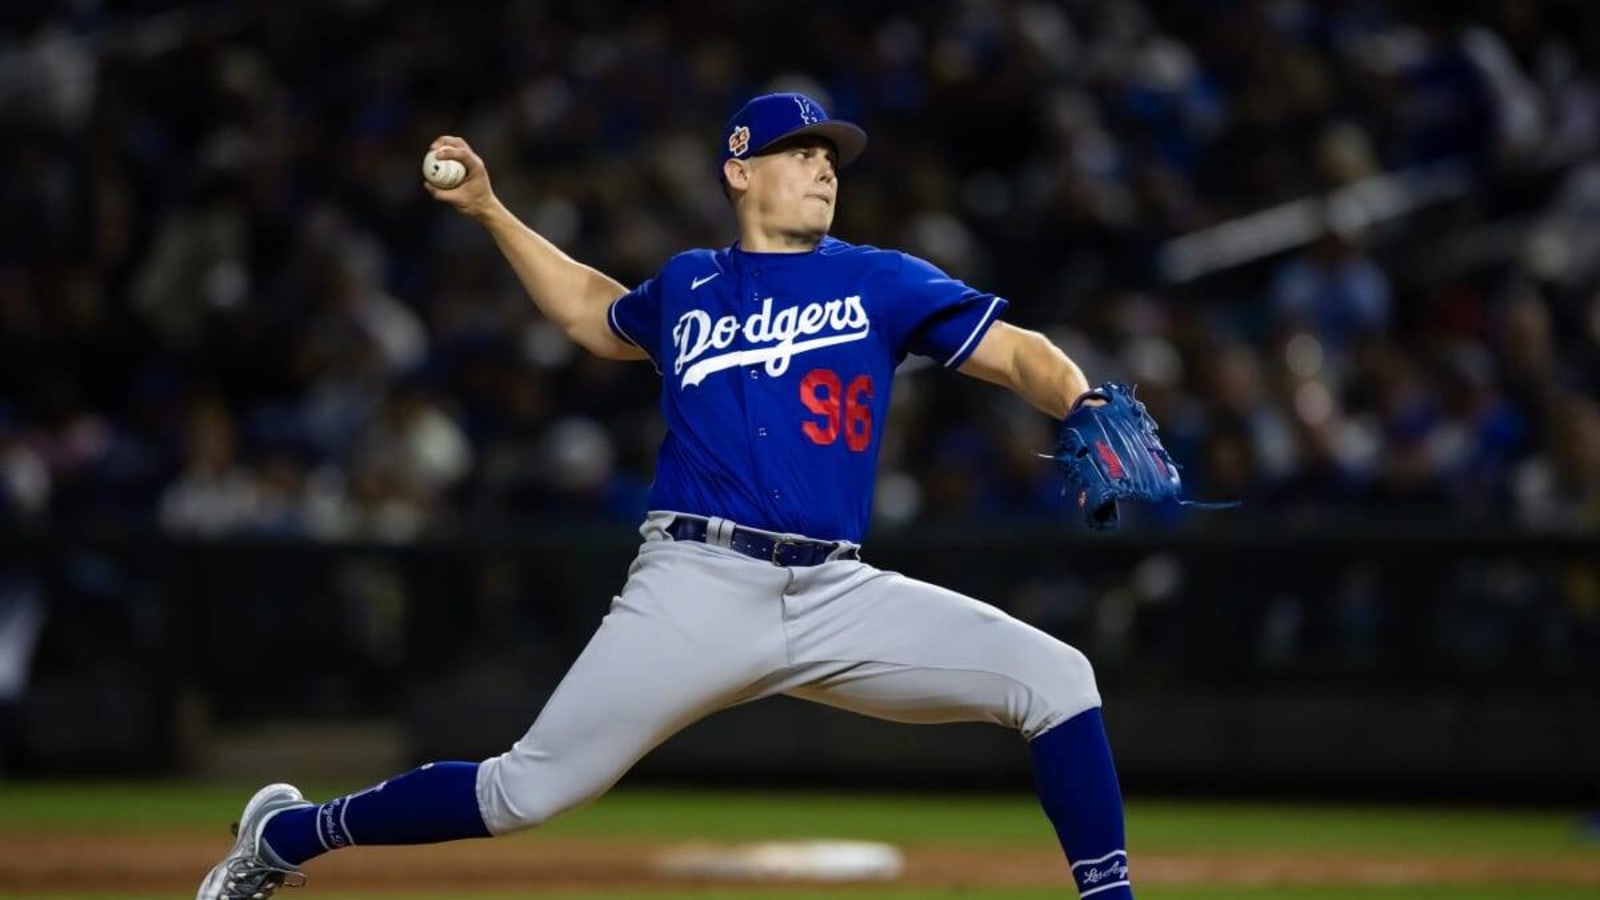 Dodgers Prospects Landon Knack and Emmet Sheehan Moving Up to AAA